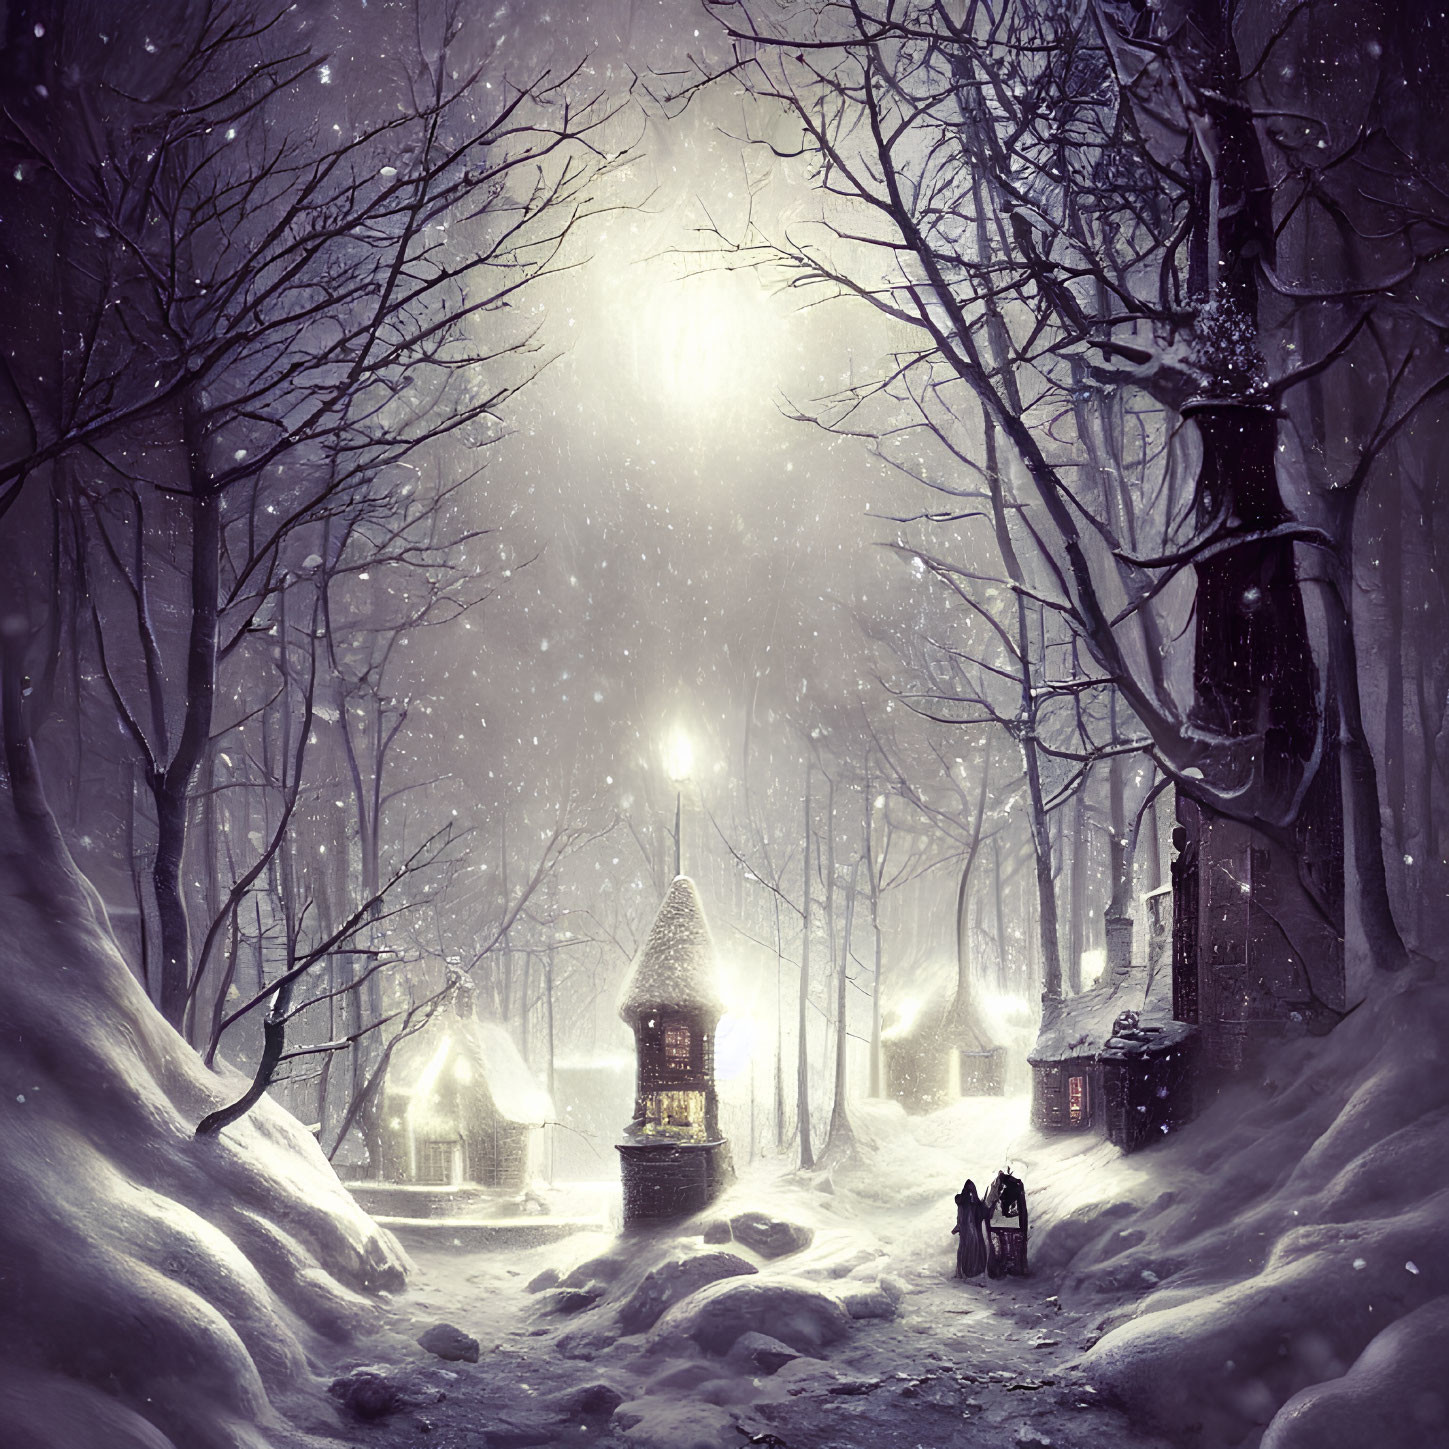 Snow-covered village with glowing streetlamp in serene wintry twilight